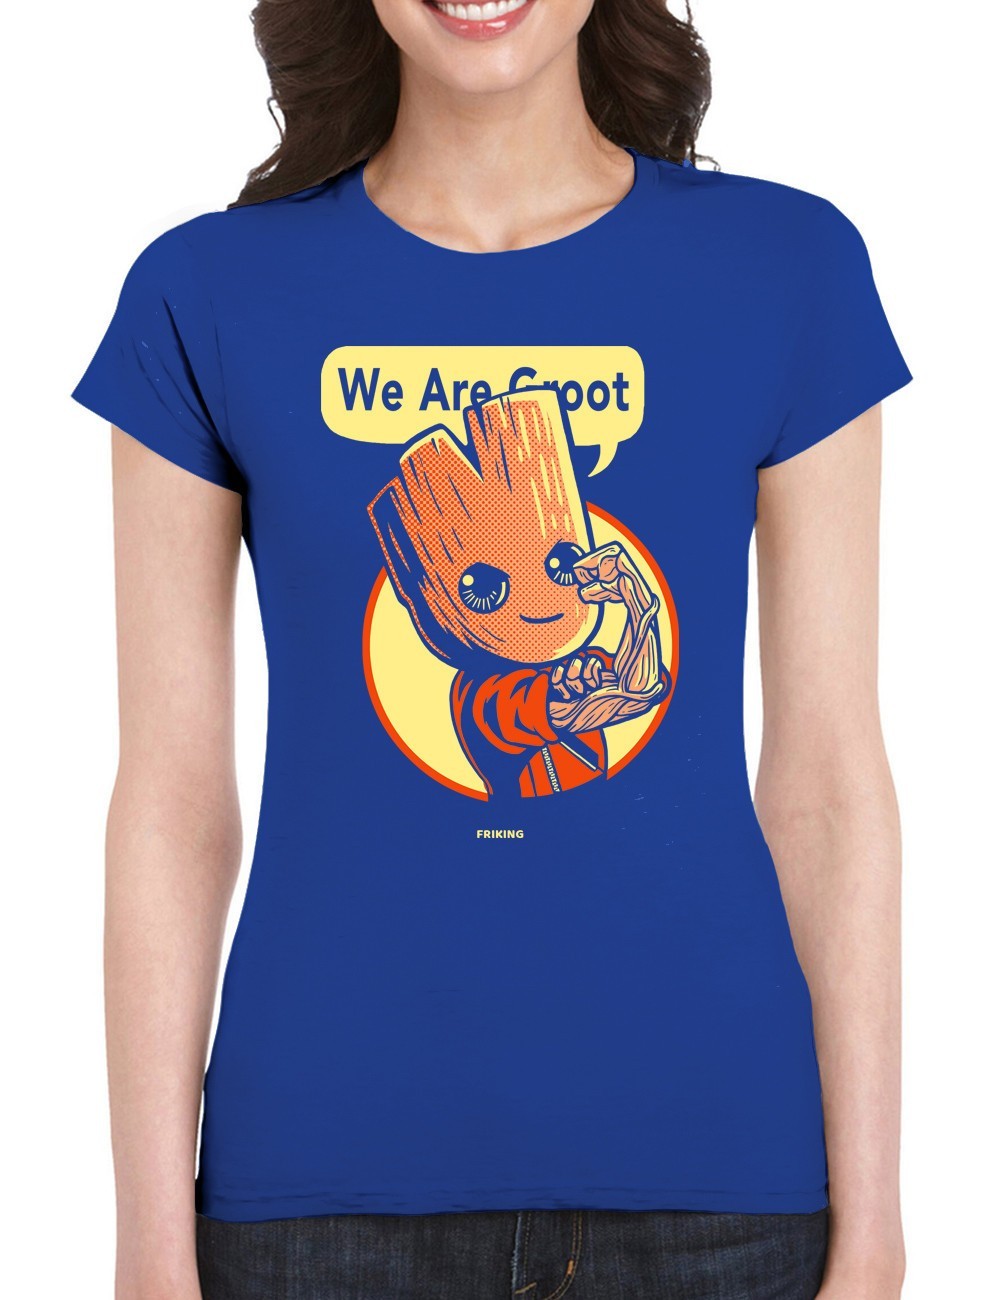  We are groot! 